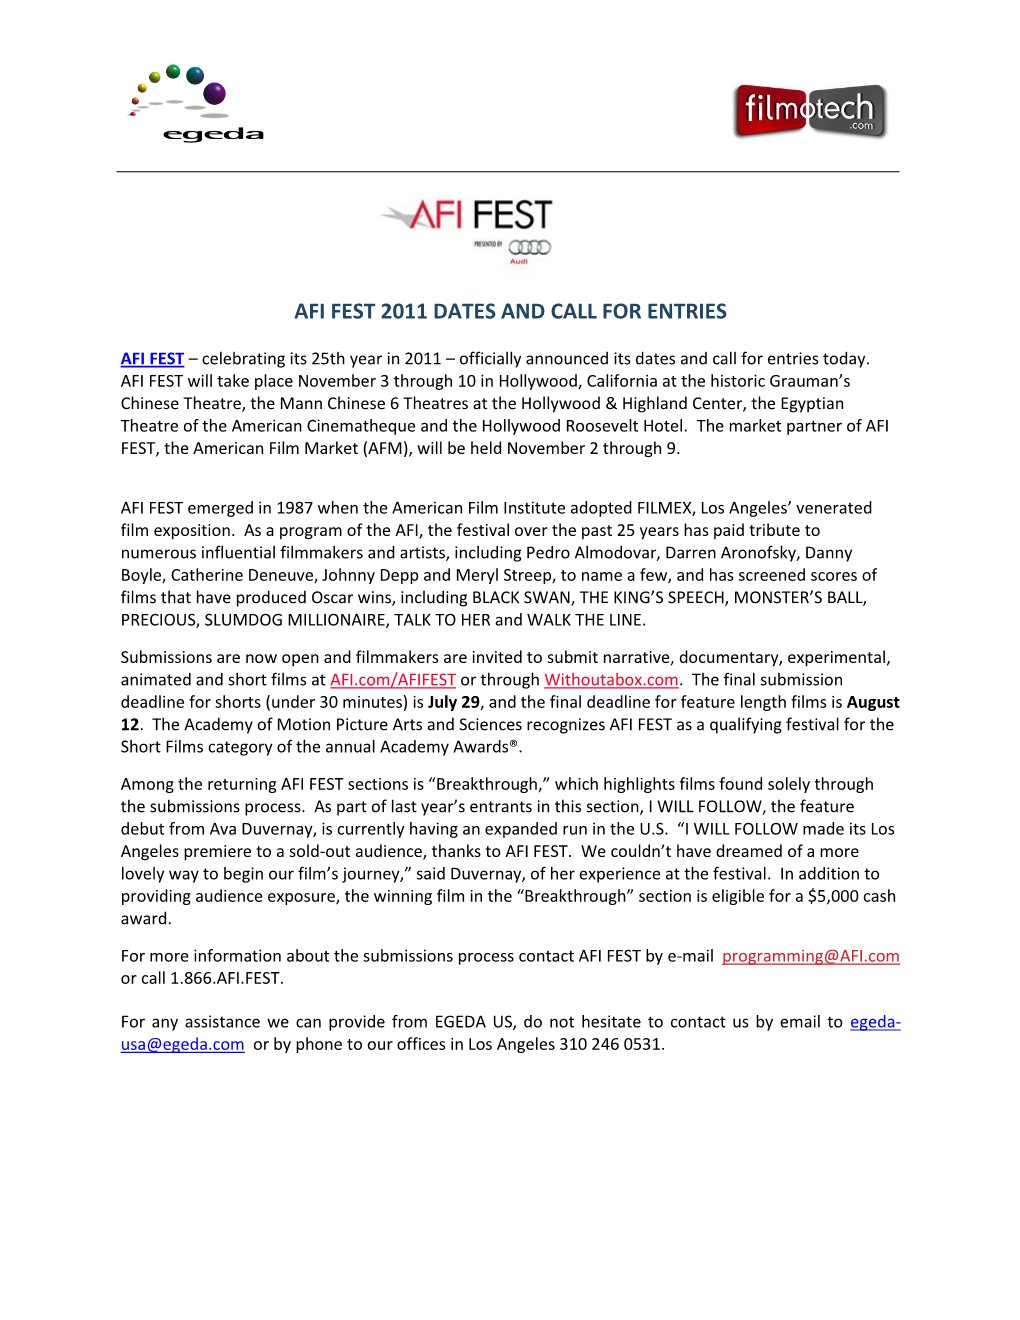 Afi Fest 2011 Dates and Call for Entries